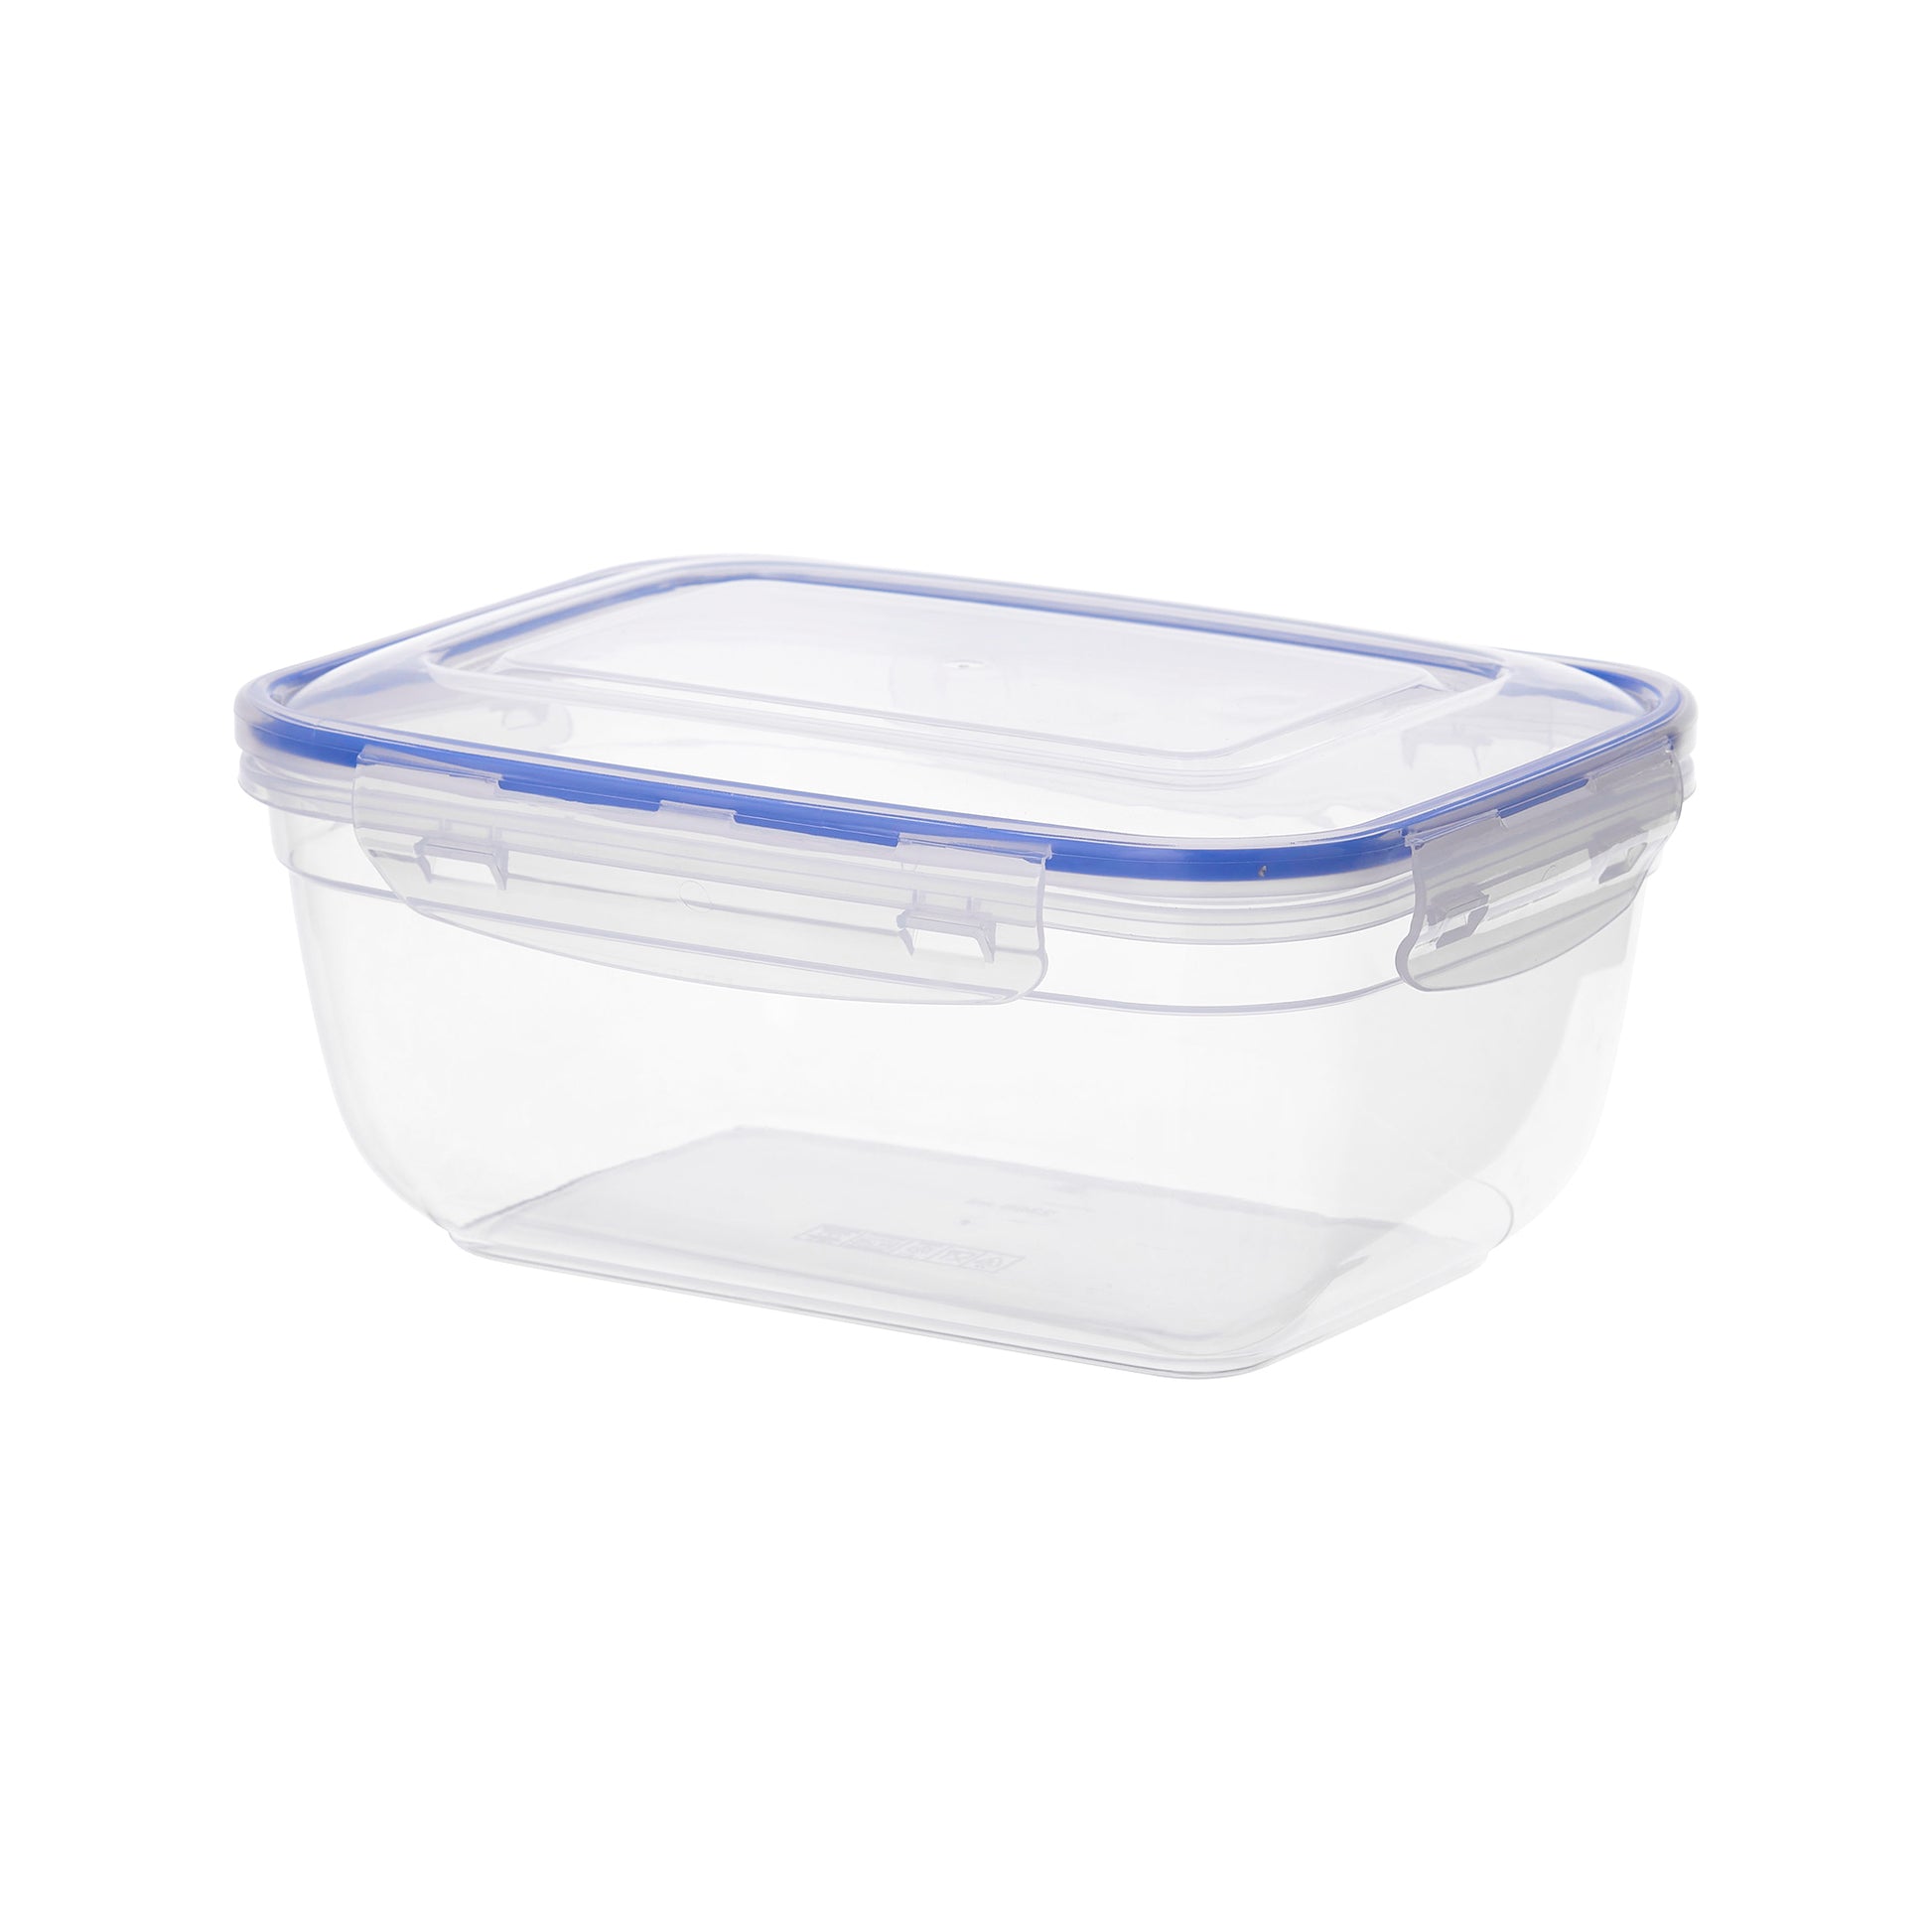 Food Storage Container With Lids Airtight, Reusable Plastic Meal